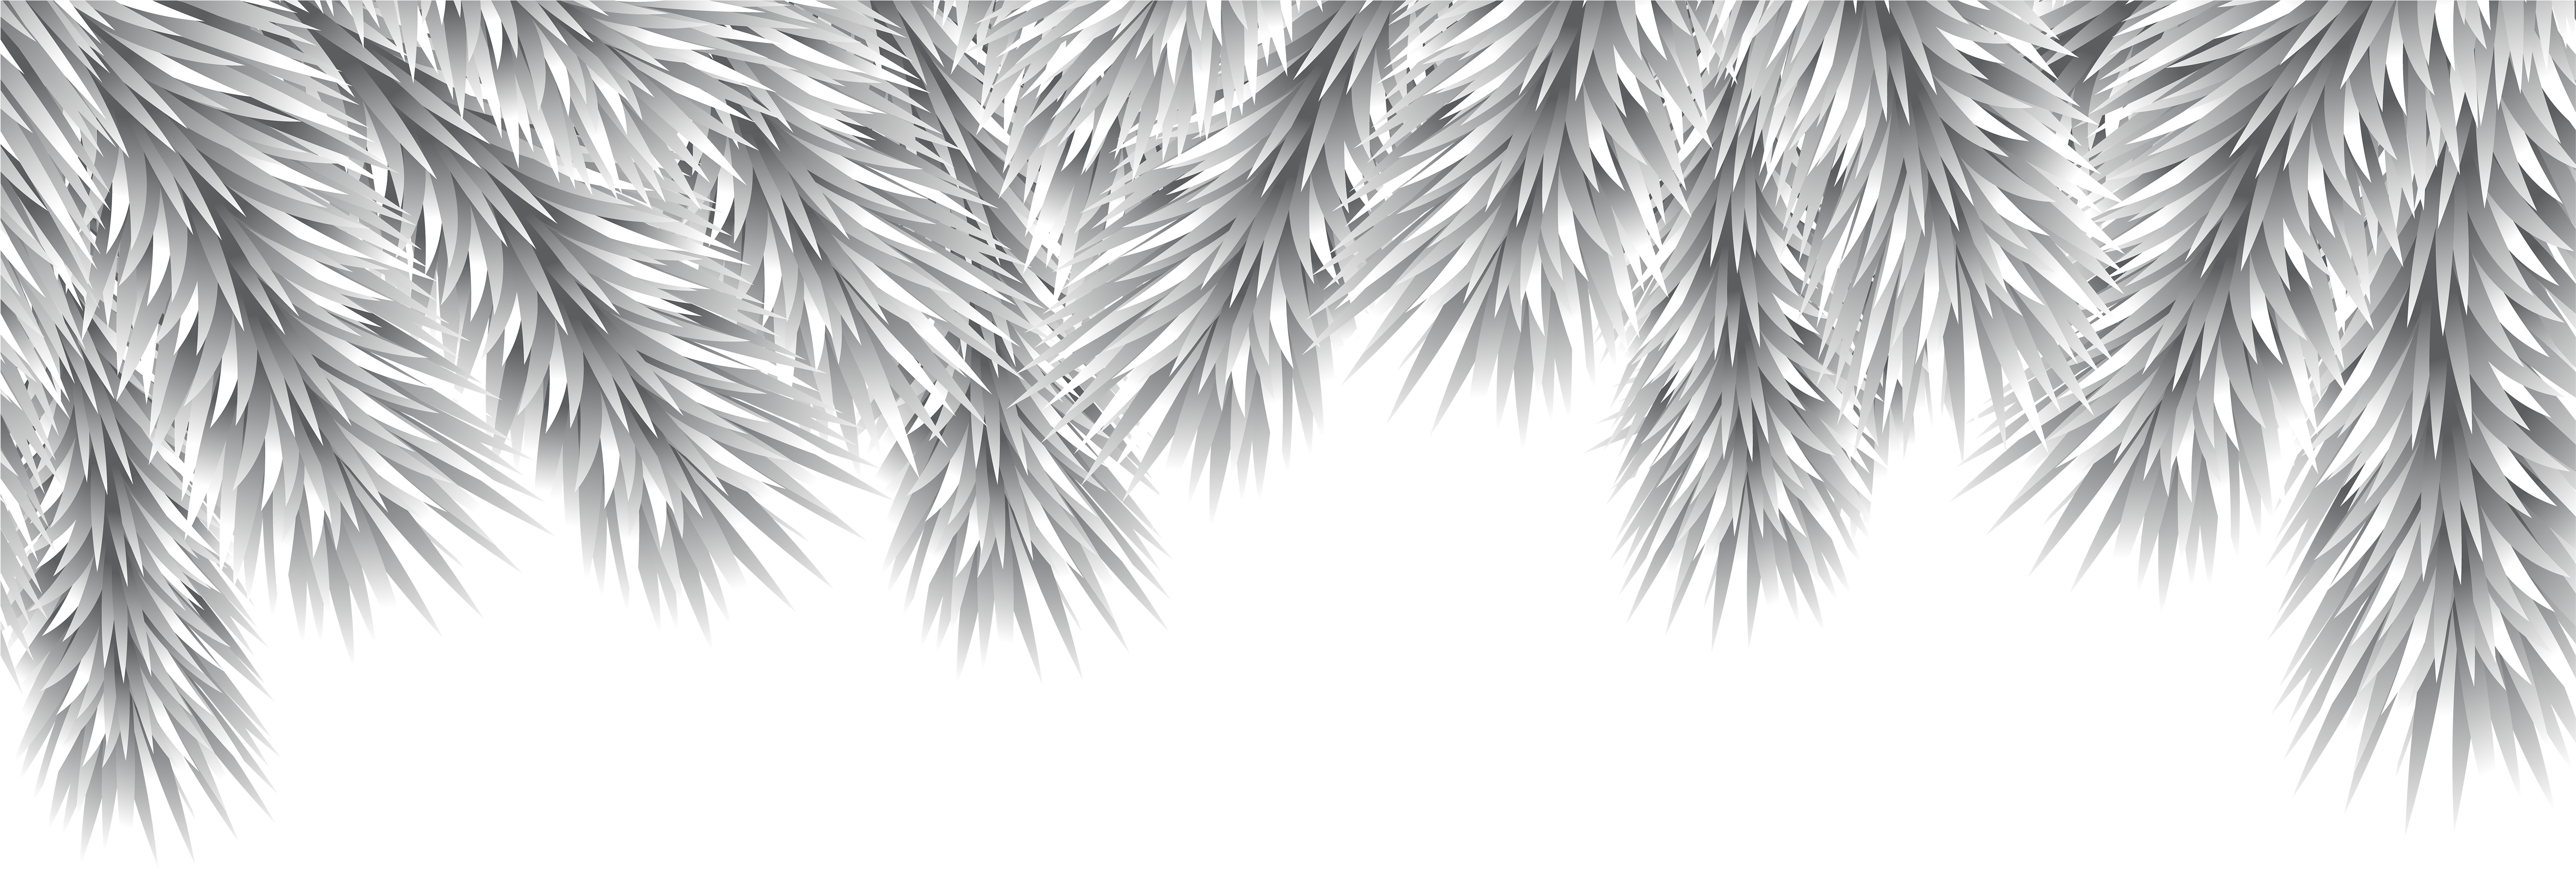 Branches Christmas Download HQ PNG Image